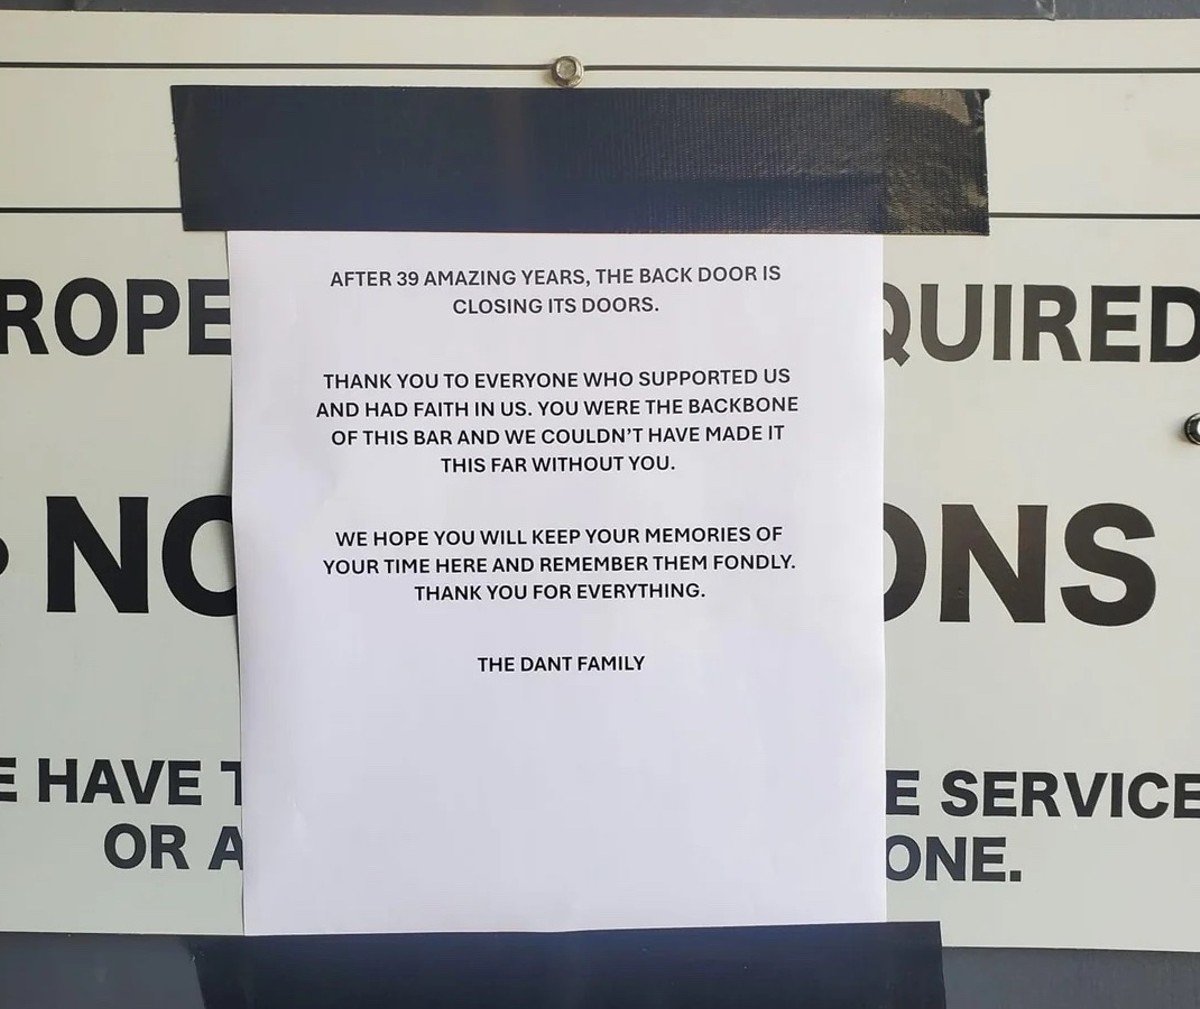 Back Door posted a sign announcing their closure.